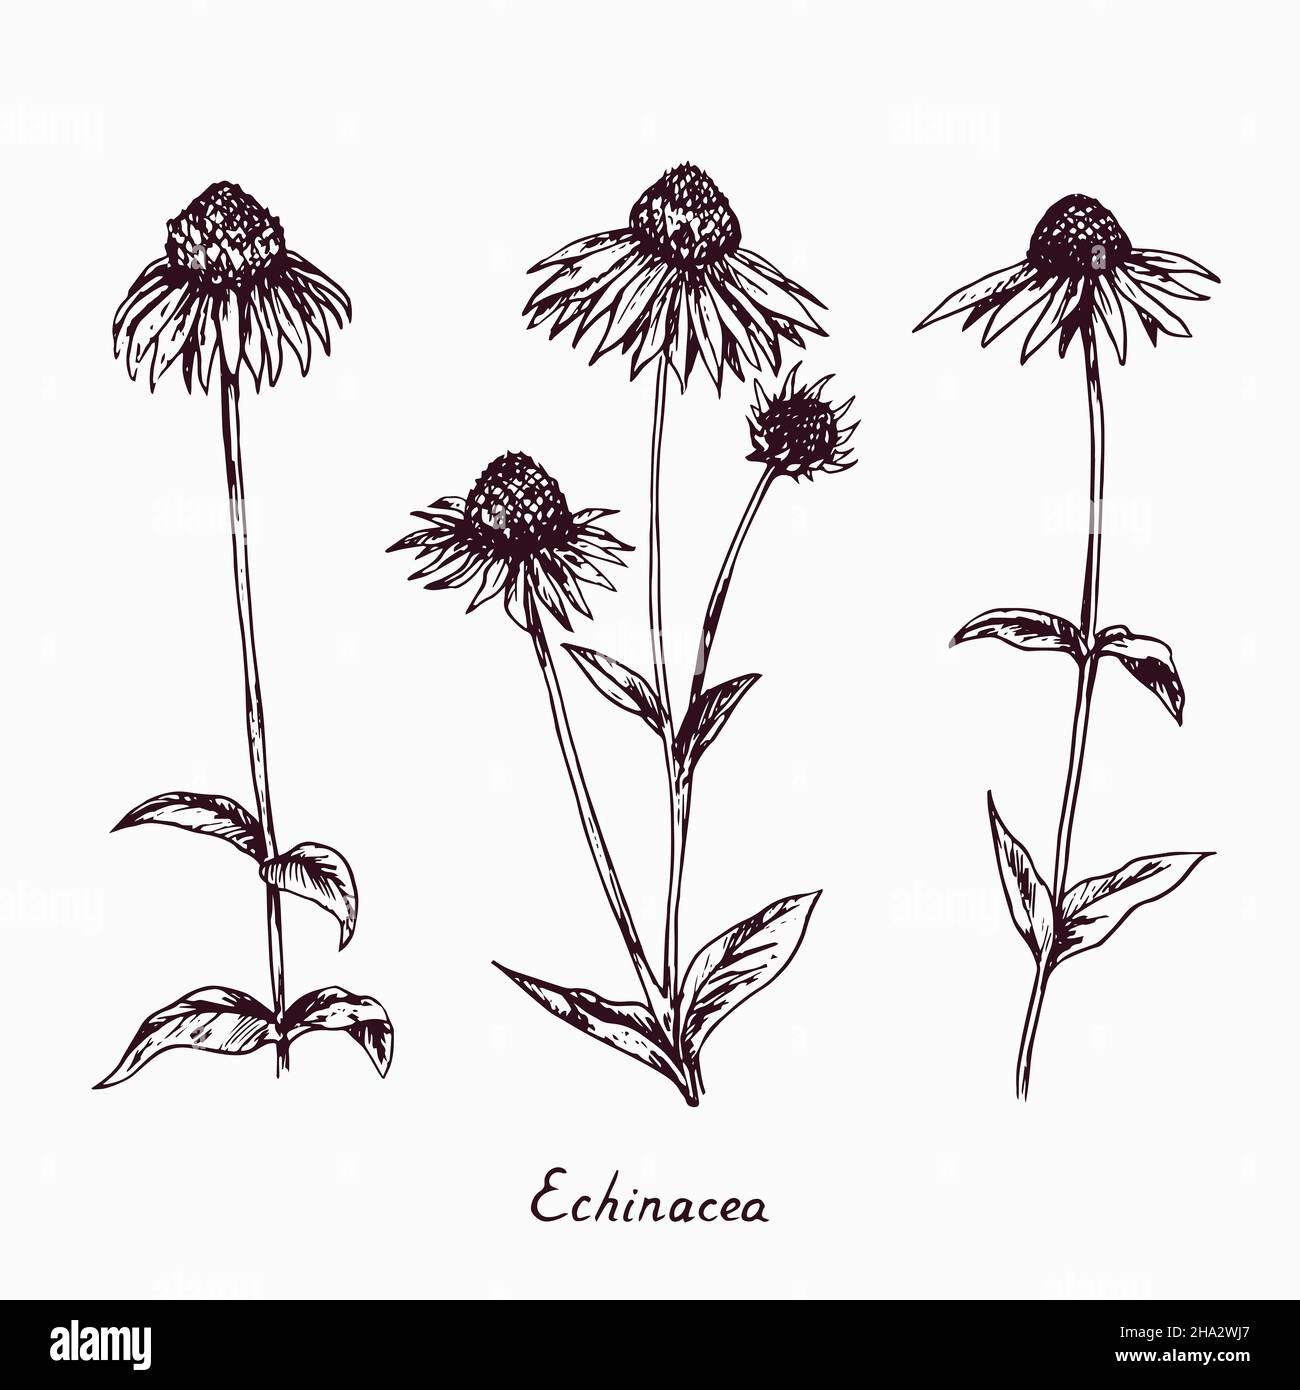 Eastern purple coneflower (Echinacea purpurea) flowers collection stems with bud and leaves, doodle drawing with inscription, vintage style Stock Photo